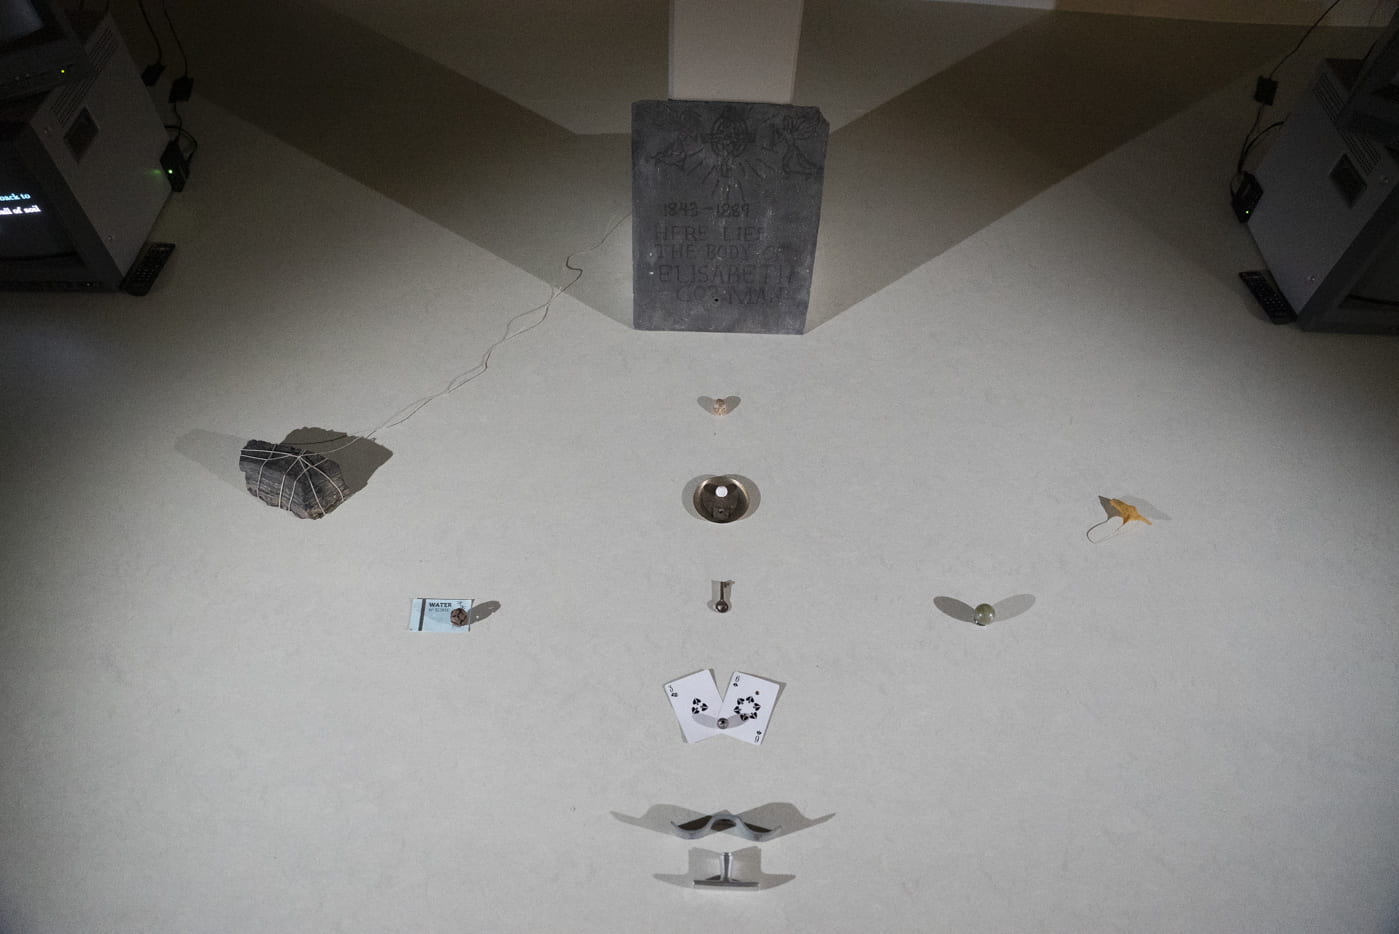 This image looks at objects laid out in a geometric pattern on the floor, such as playing cards, a rock tied with string, a small key, a leaf in front of a mock gravestone